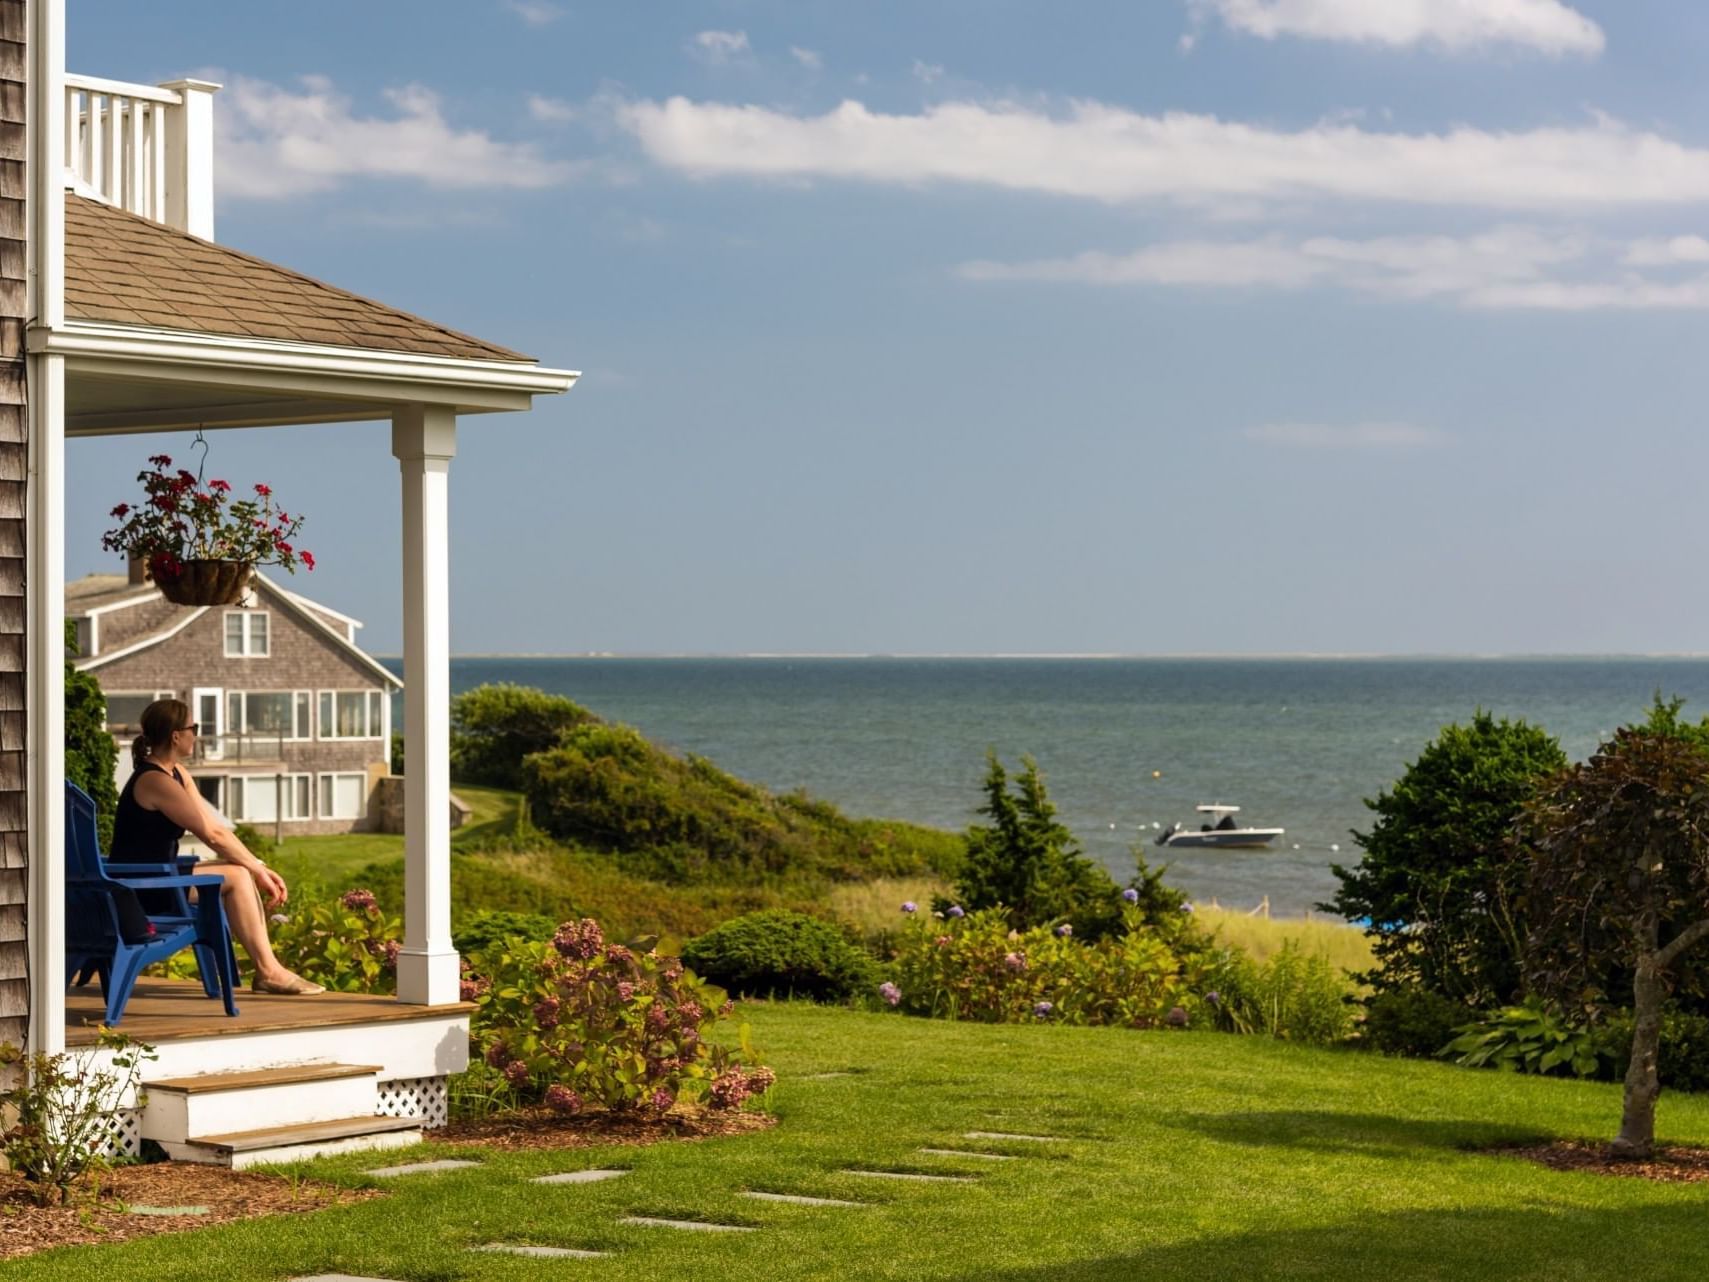 Lady overlooking the sea on the balcony lounge in Eventide 4-bedroom House at Chatham Tides Resort